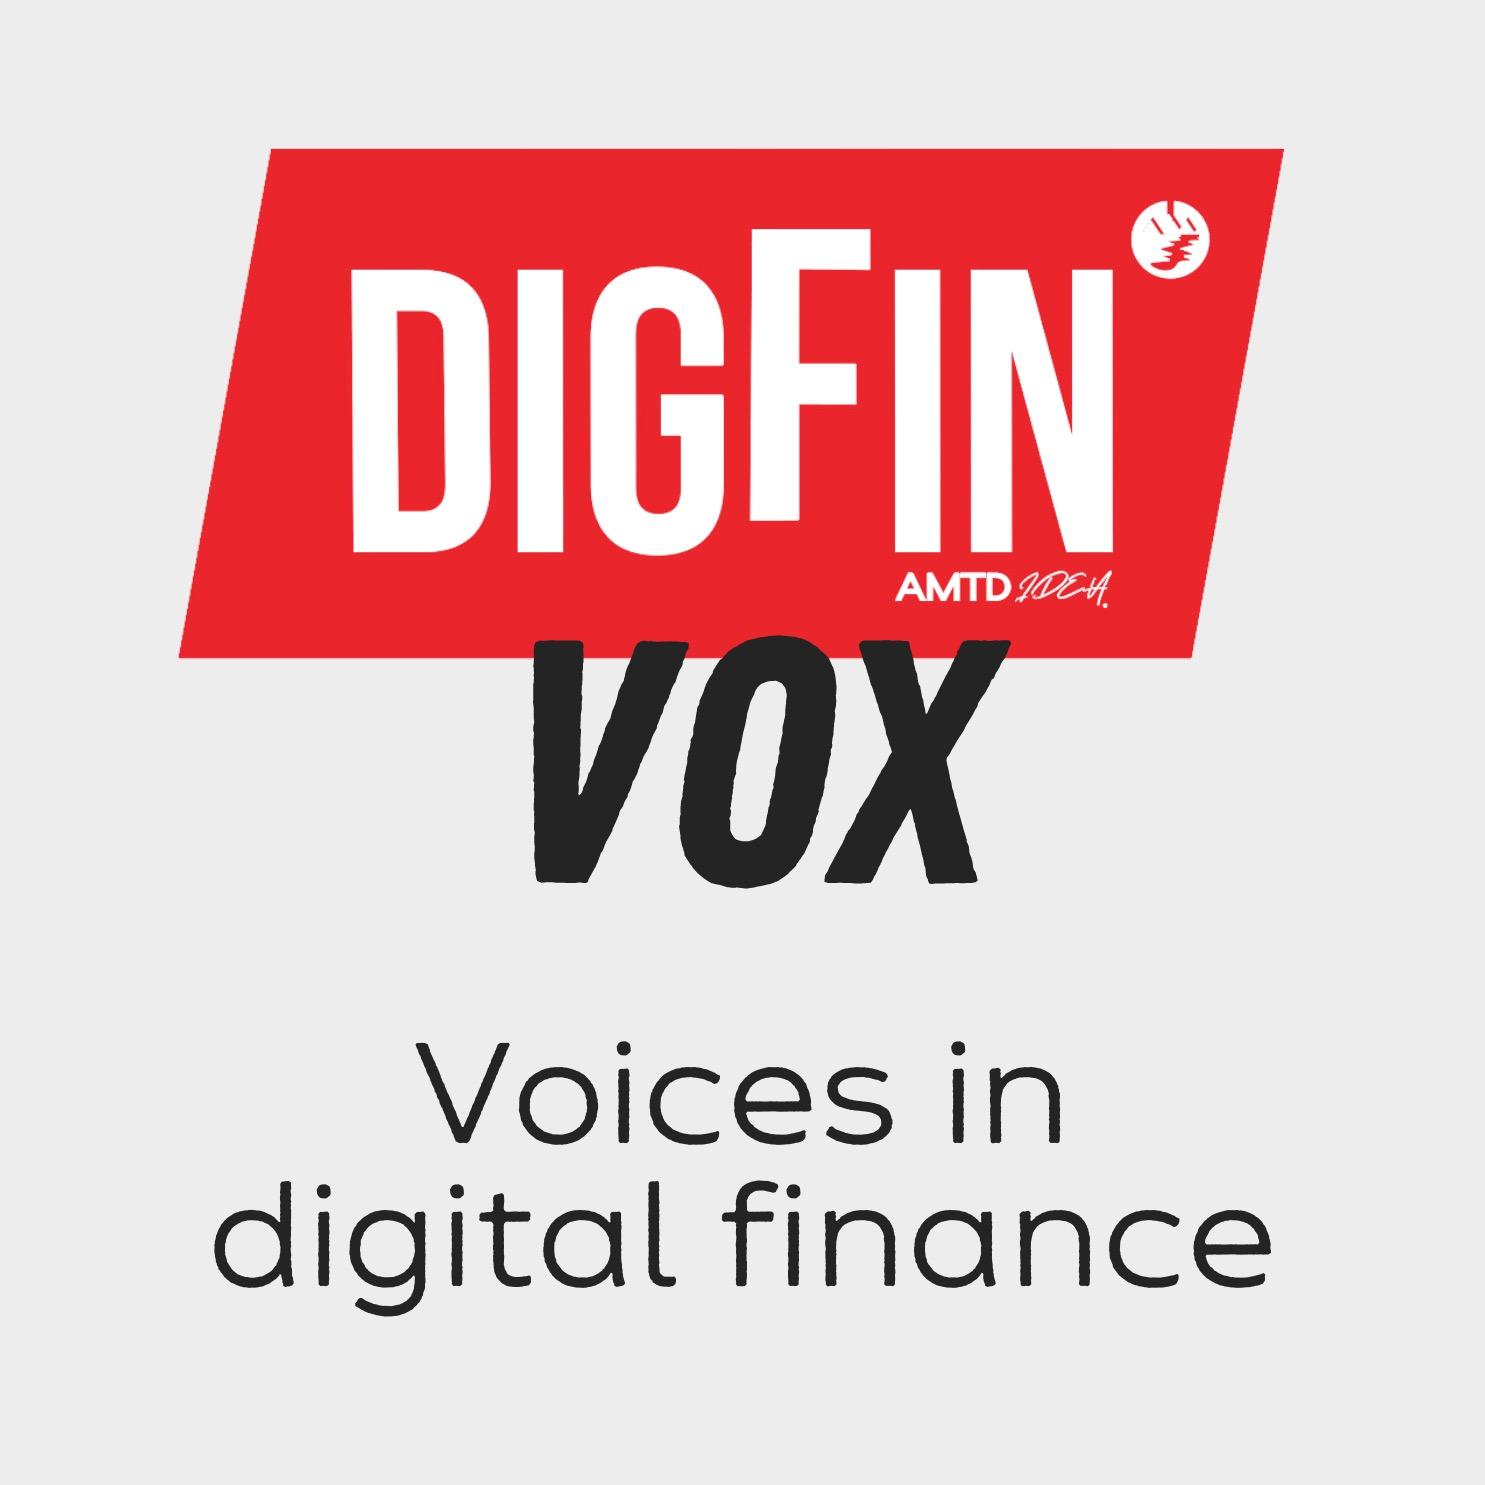 DigFin VOX